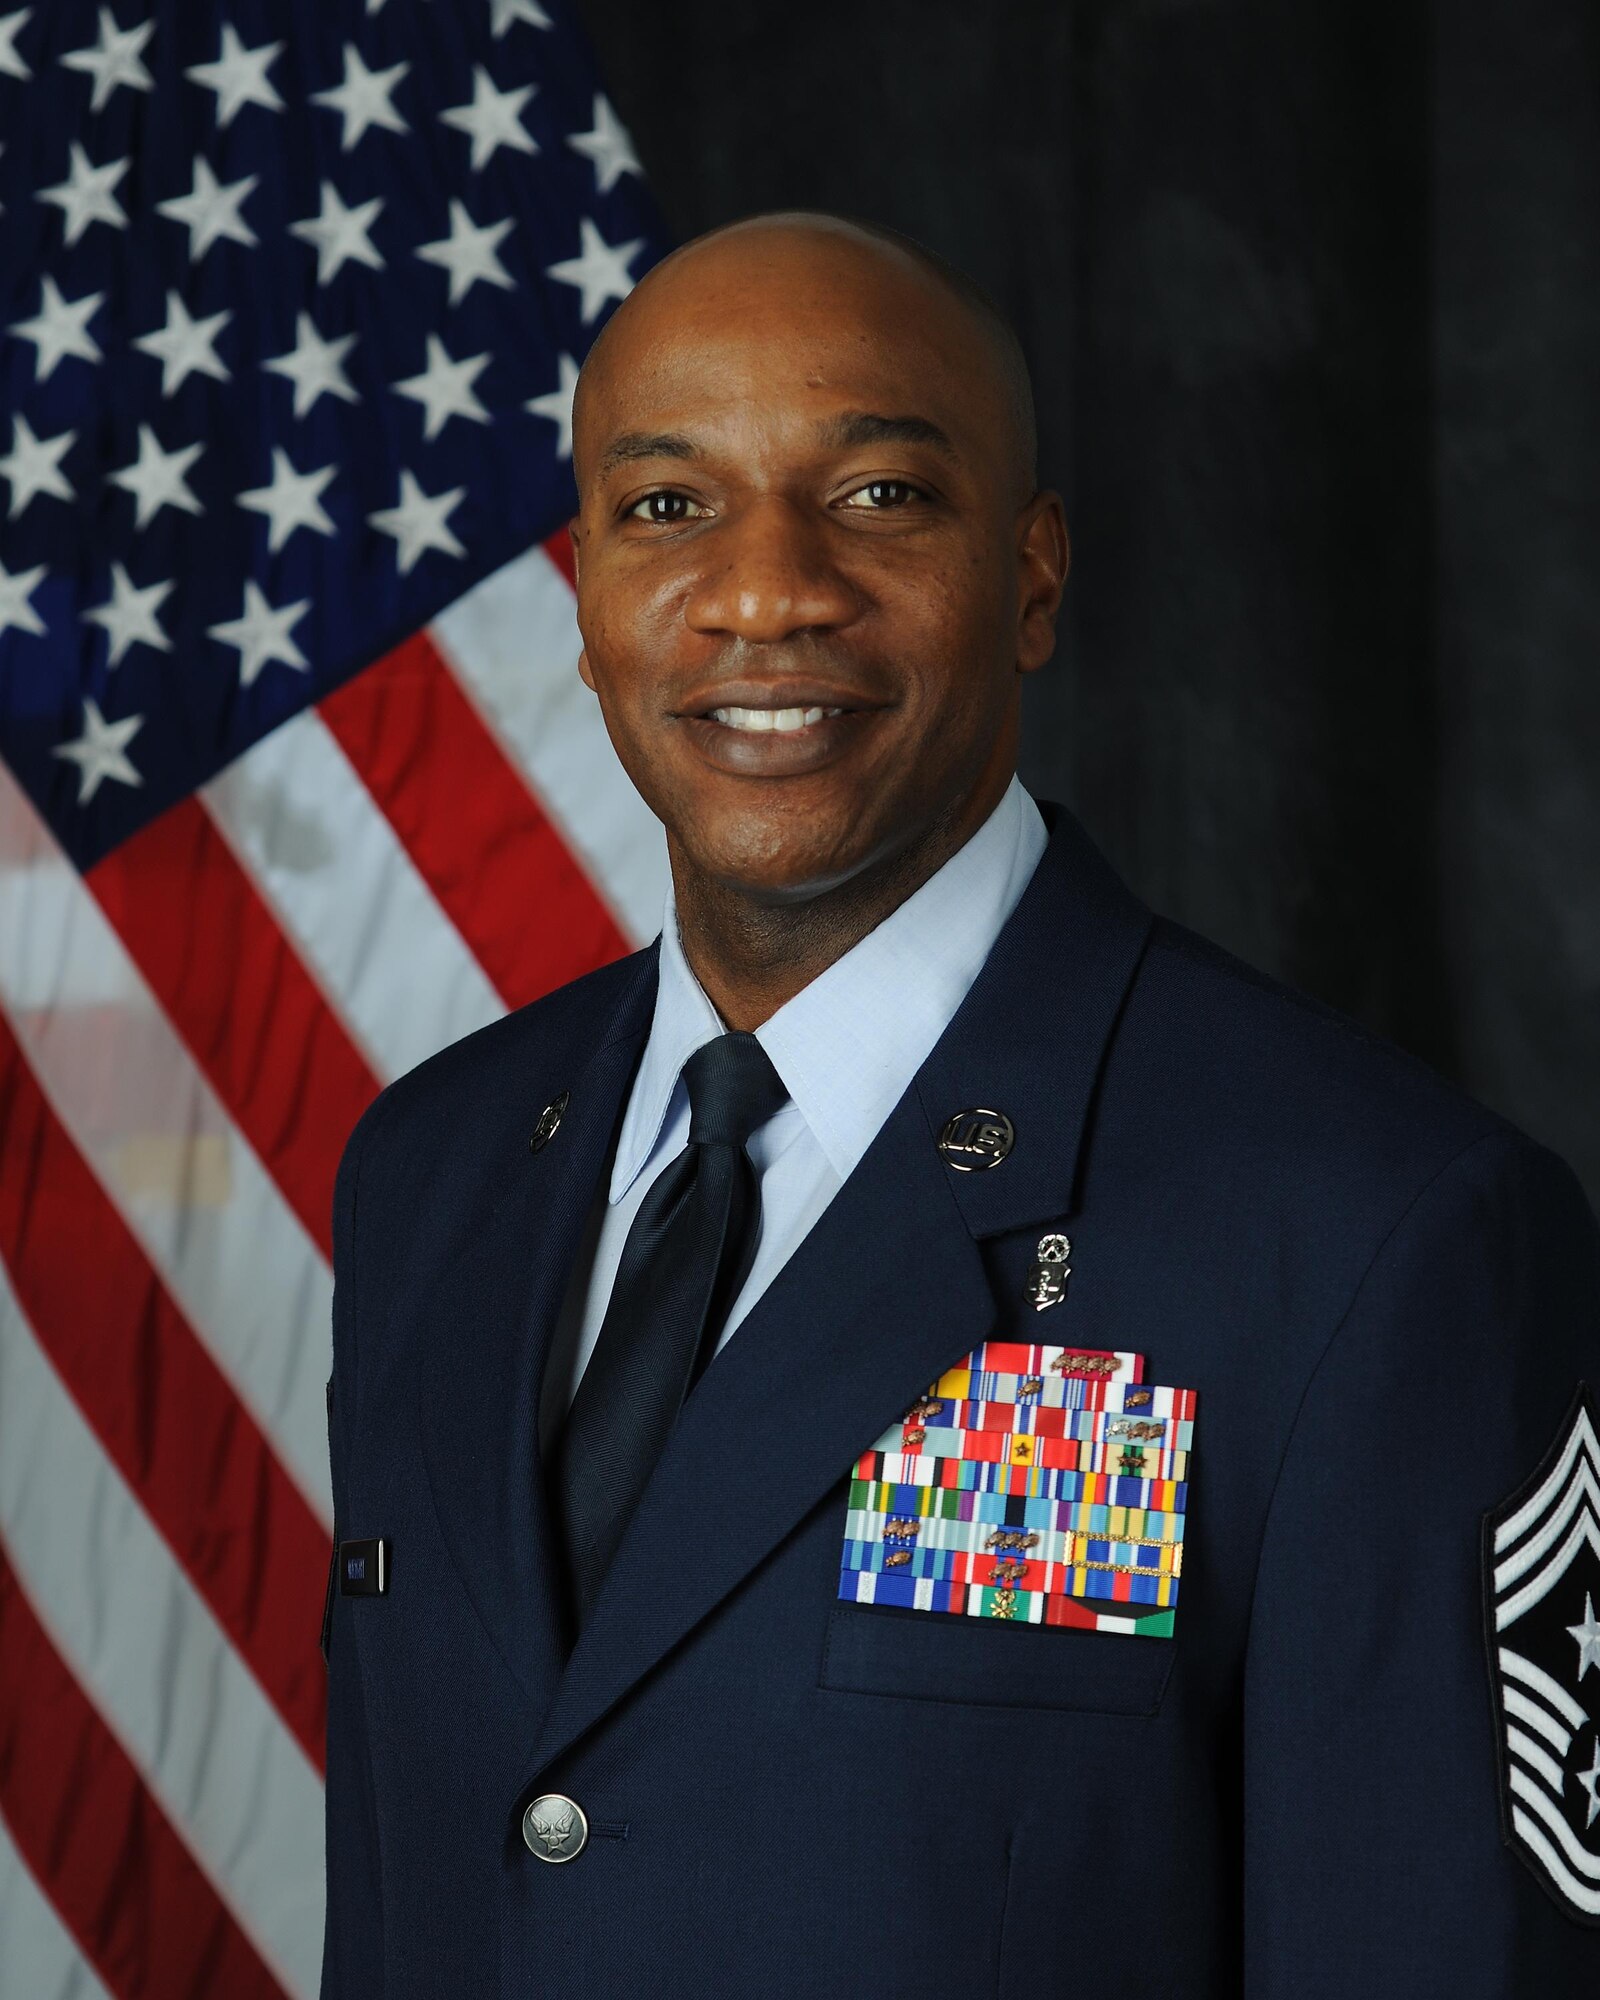 Chief Master Sgt. Kaleth O. Wright was named the 18th Chief Master Sergeant of the Air Force by U.S. Air Force Chief of Staff Gen. David L. Goldfein, Nov. 16, 2016. Wright will assume the duties of CMSAF in February following the retirement of Chief Master Sgt. of the Air Force James A. Cody. (U.S. Air Force file photo)